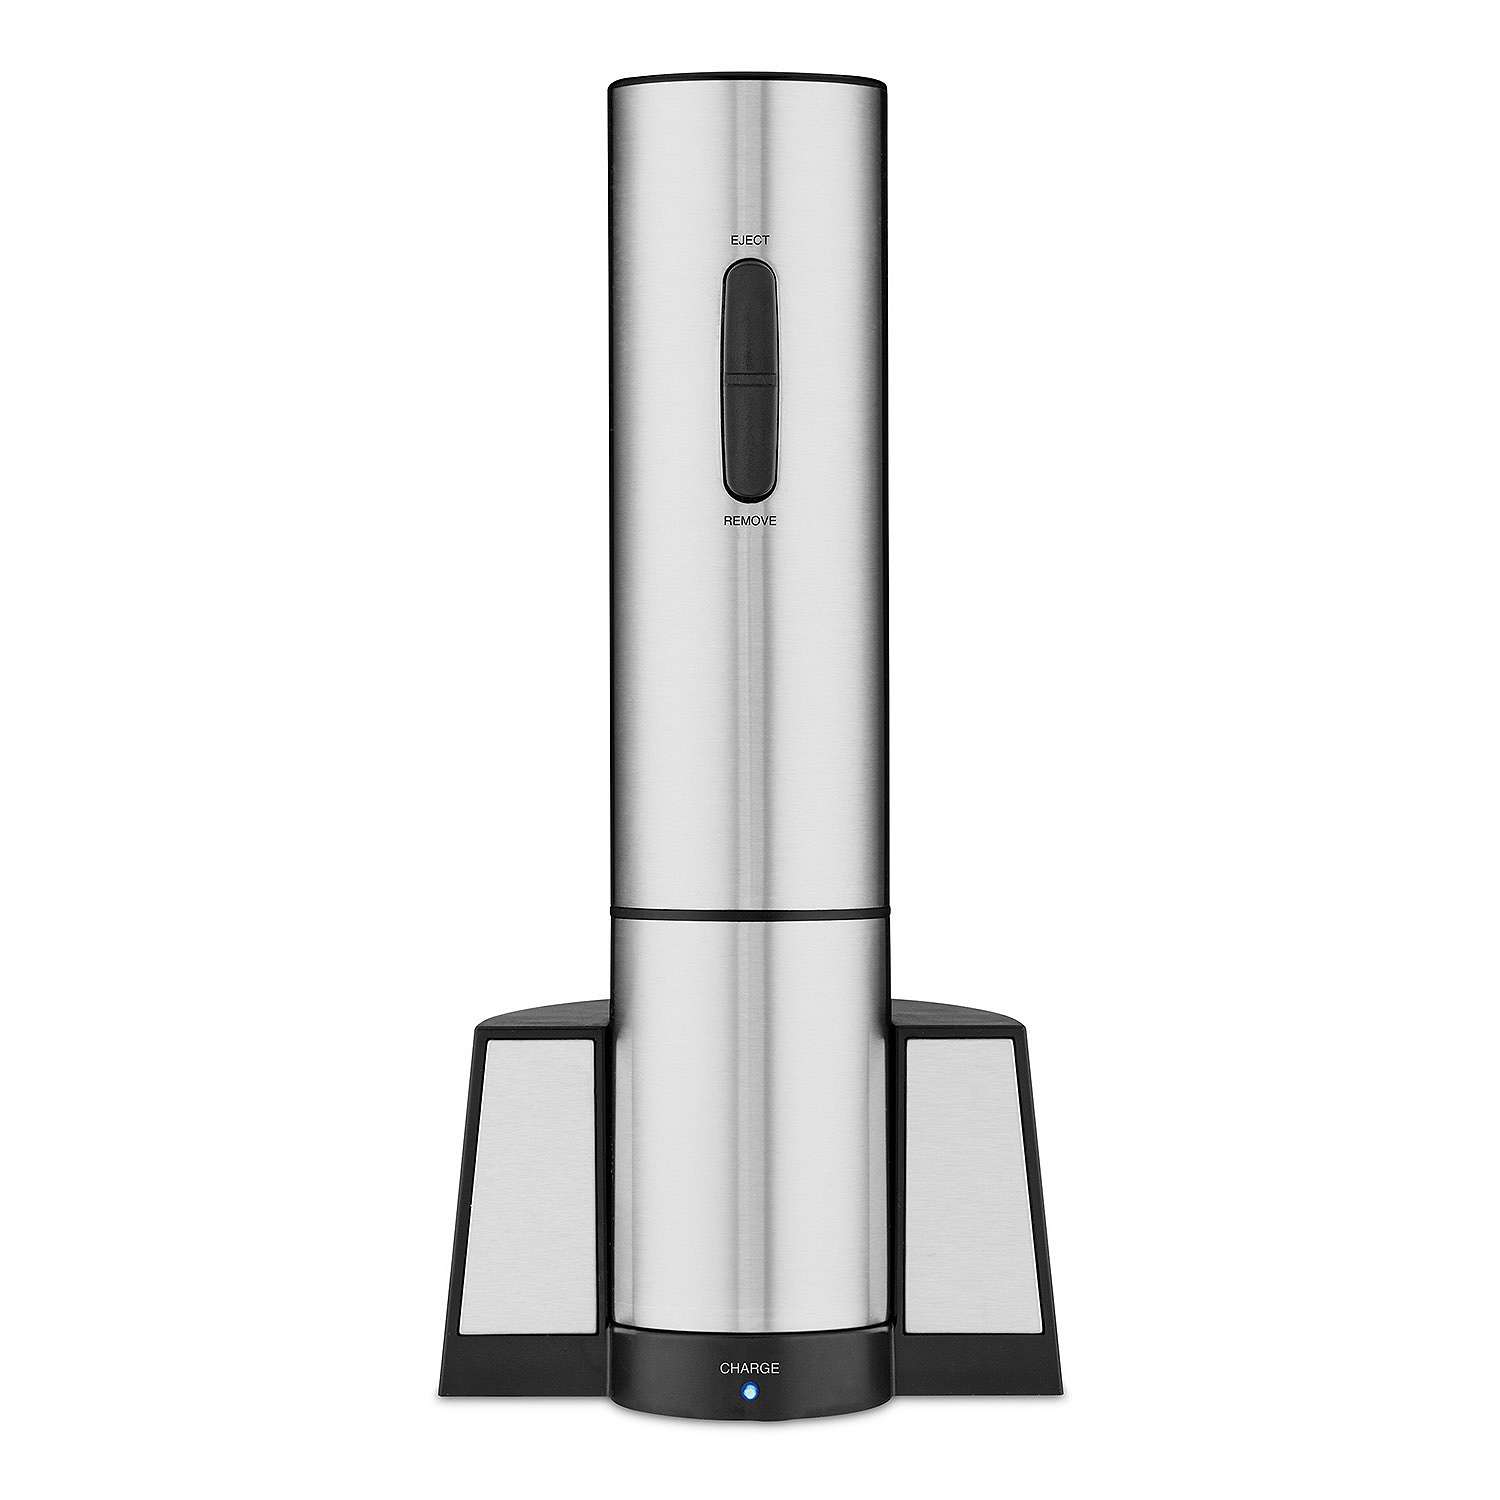 Cuisinart Electric Wine Opener $13.16 + Free Store Pickup at Kohl's or F/S on Orders $49+